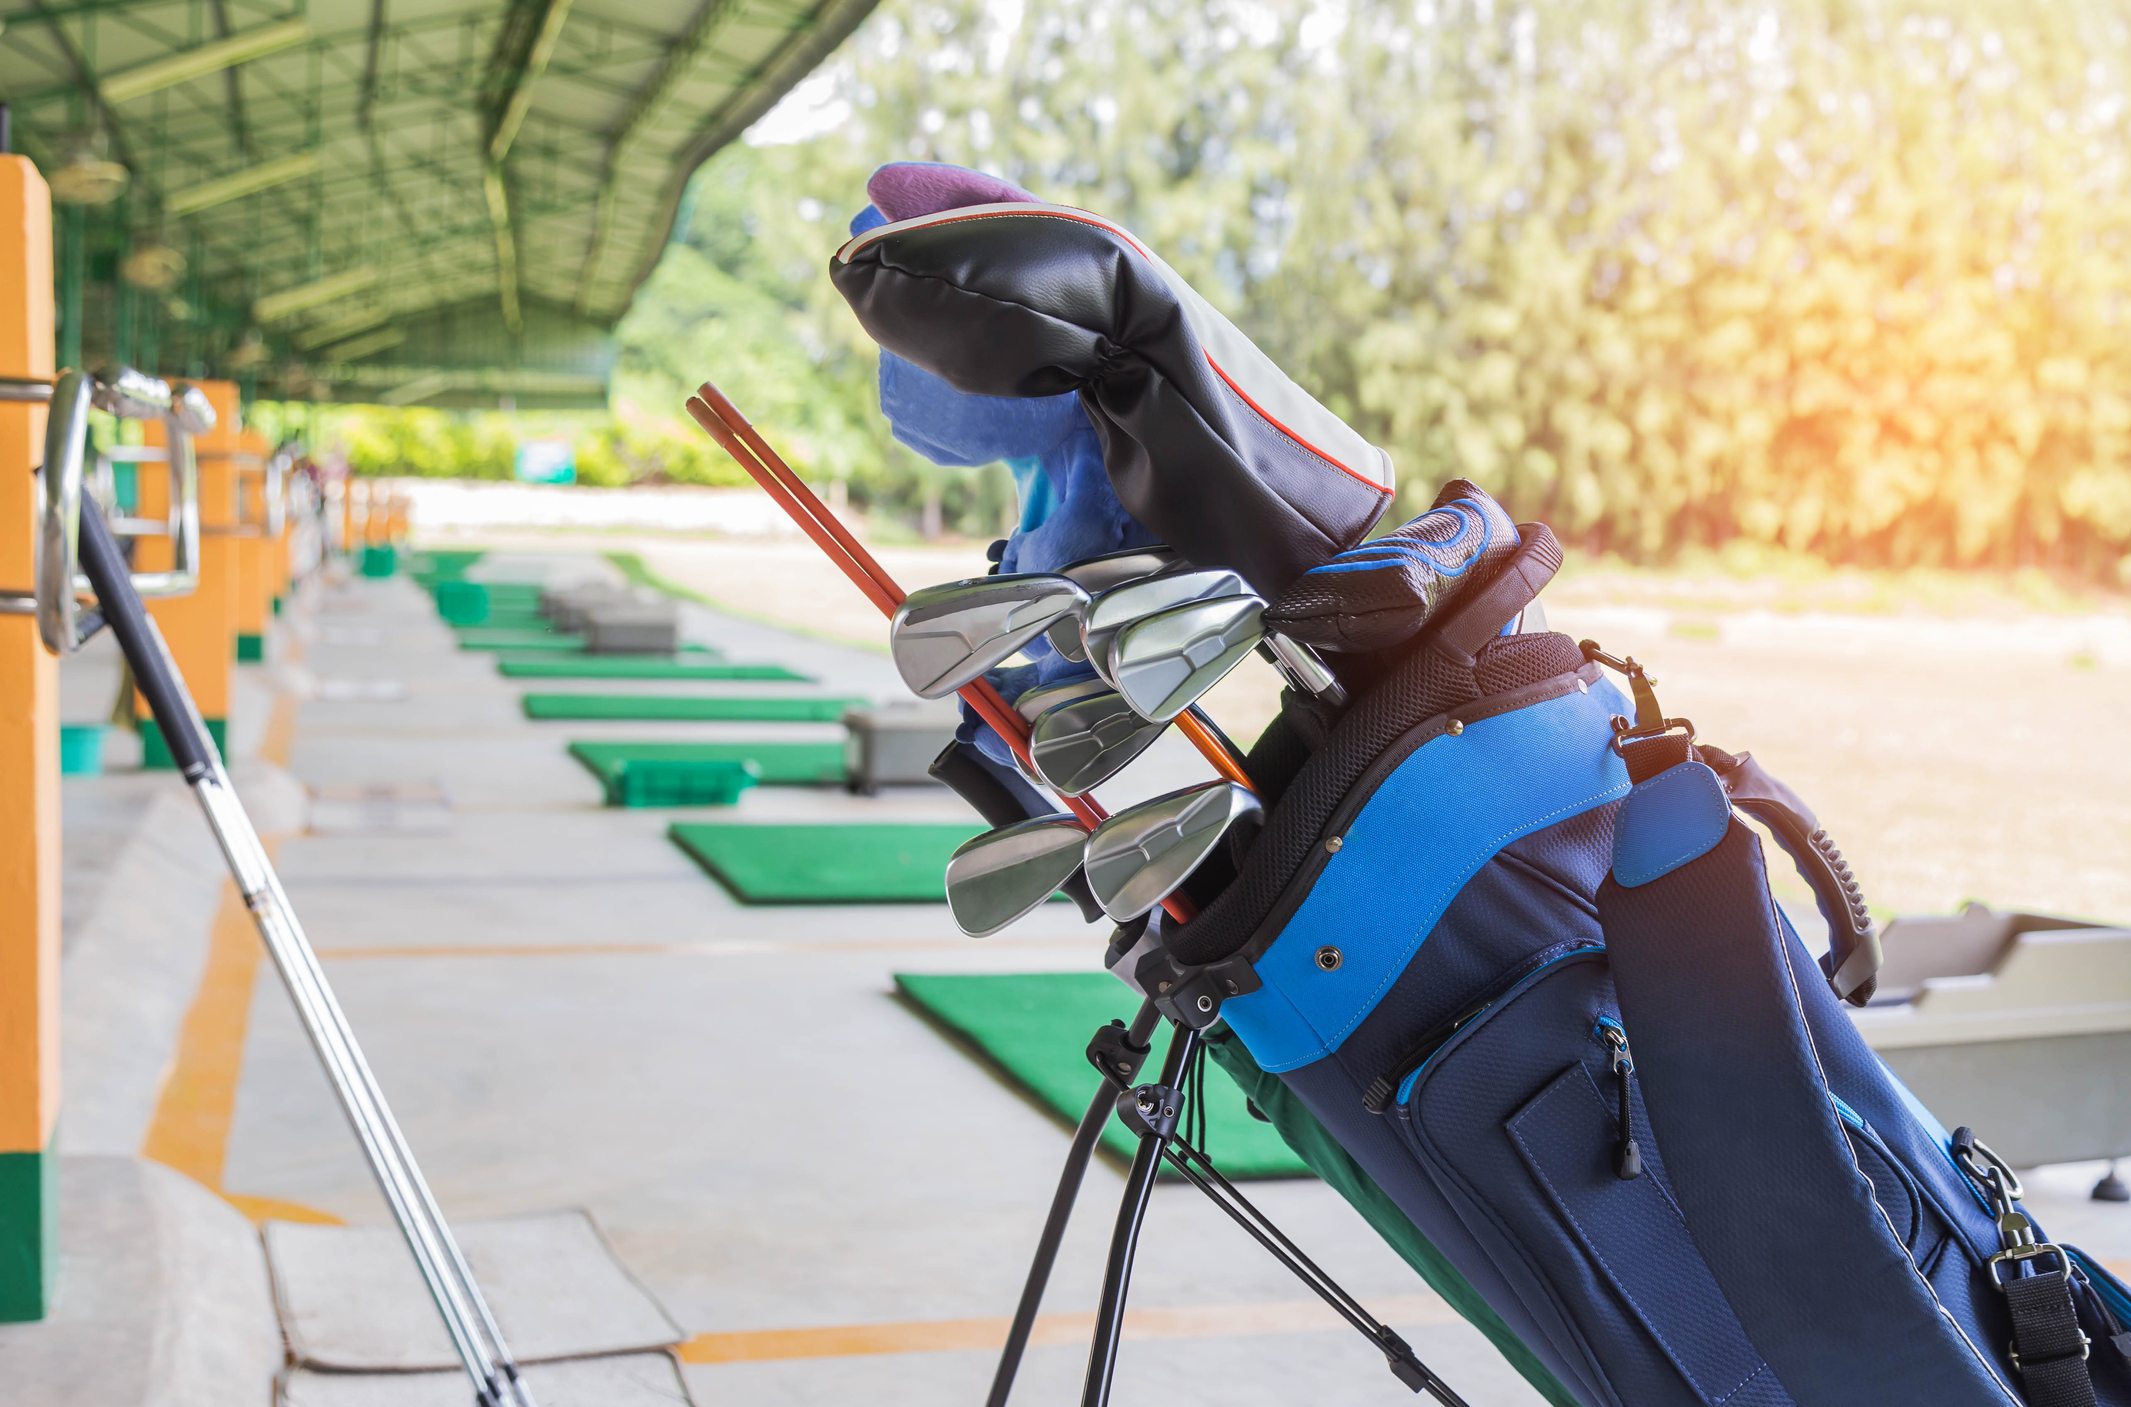 A golf cart filled with golf clubs standing at a driving range.